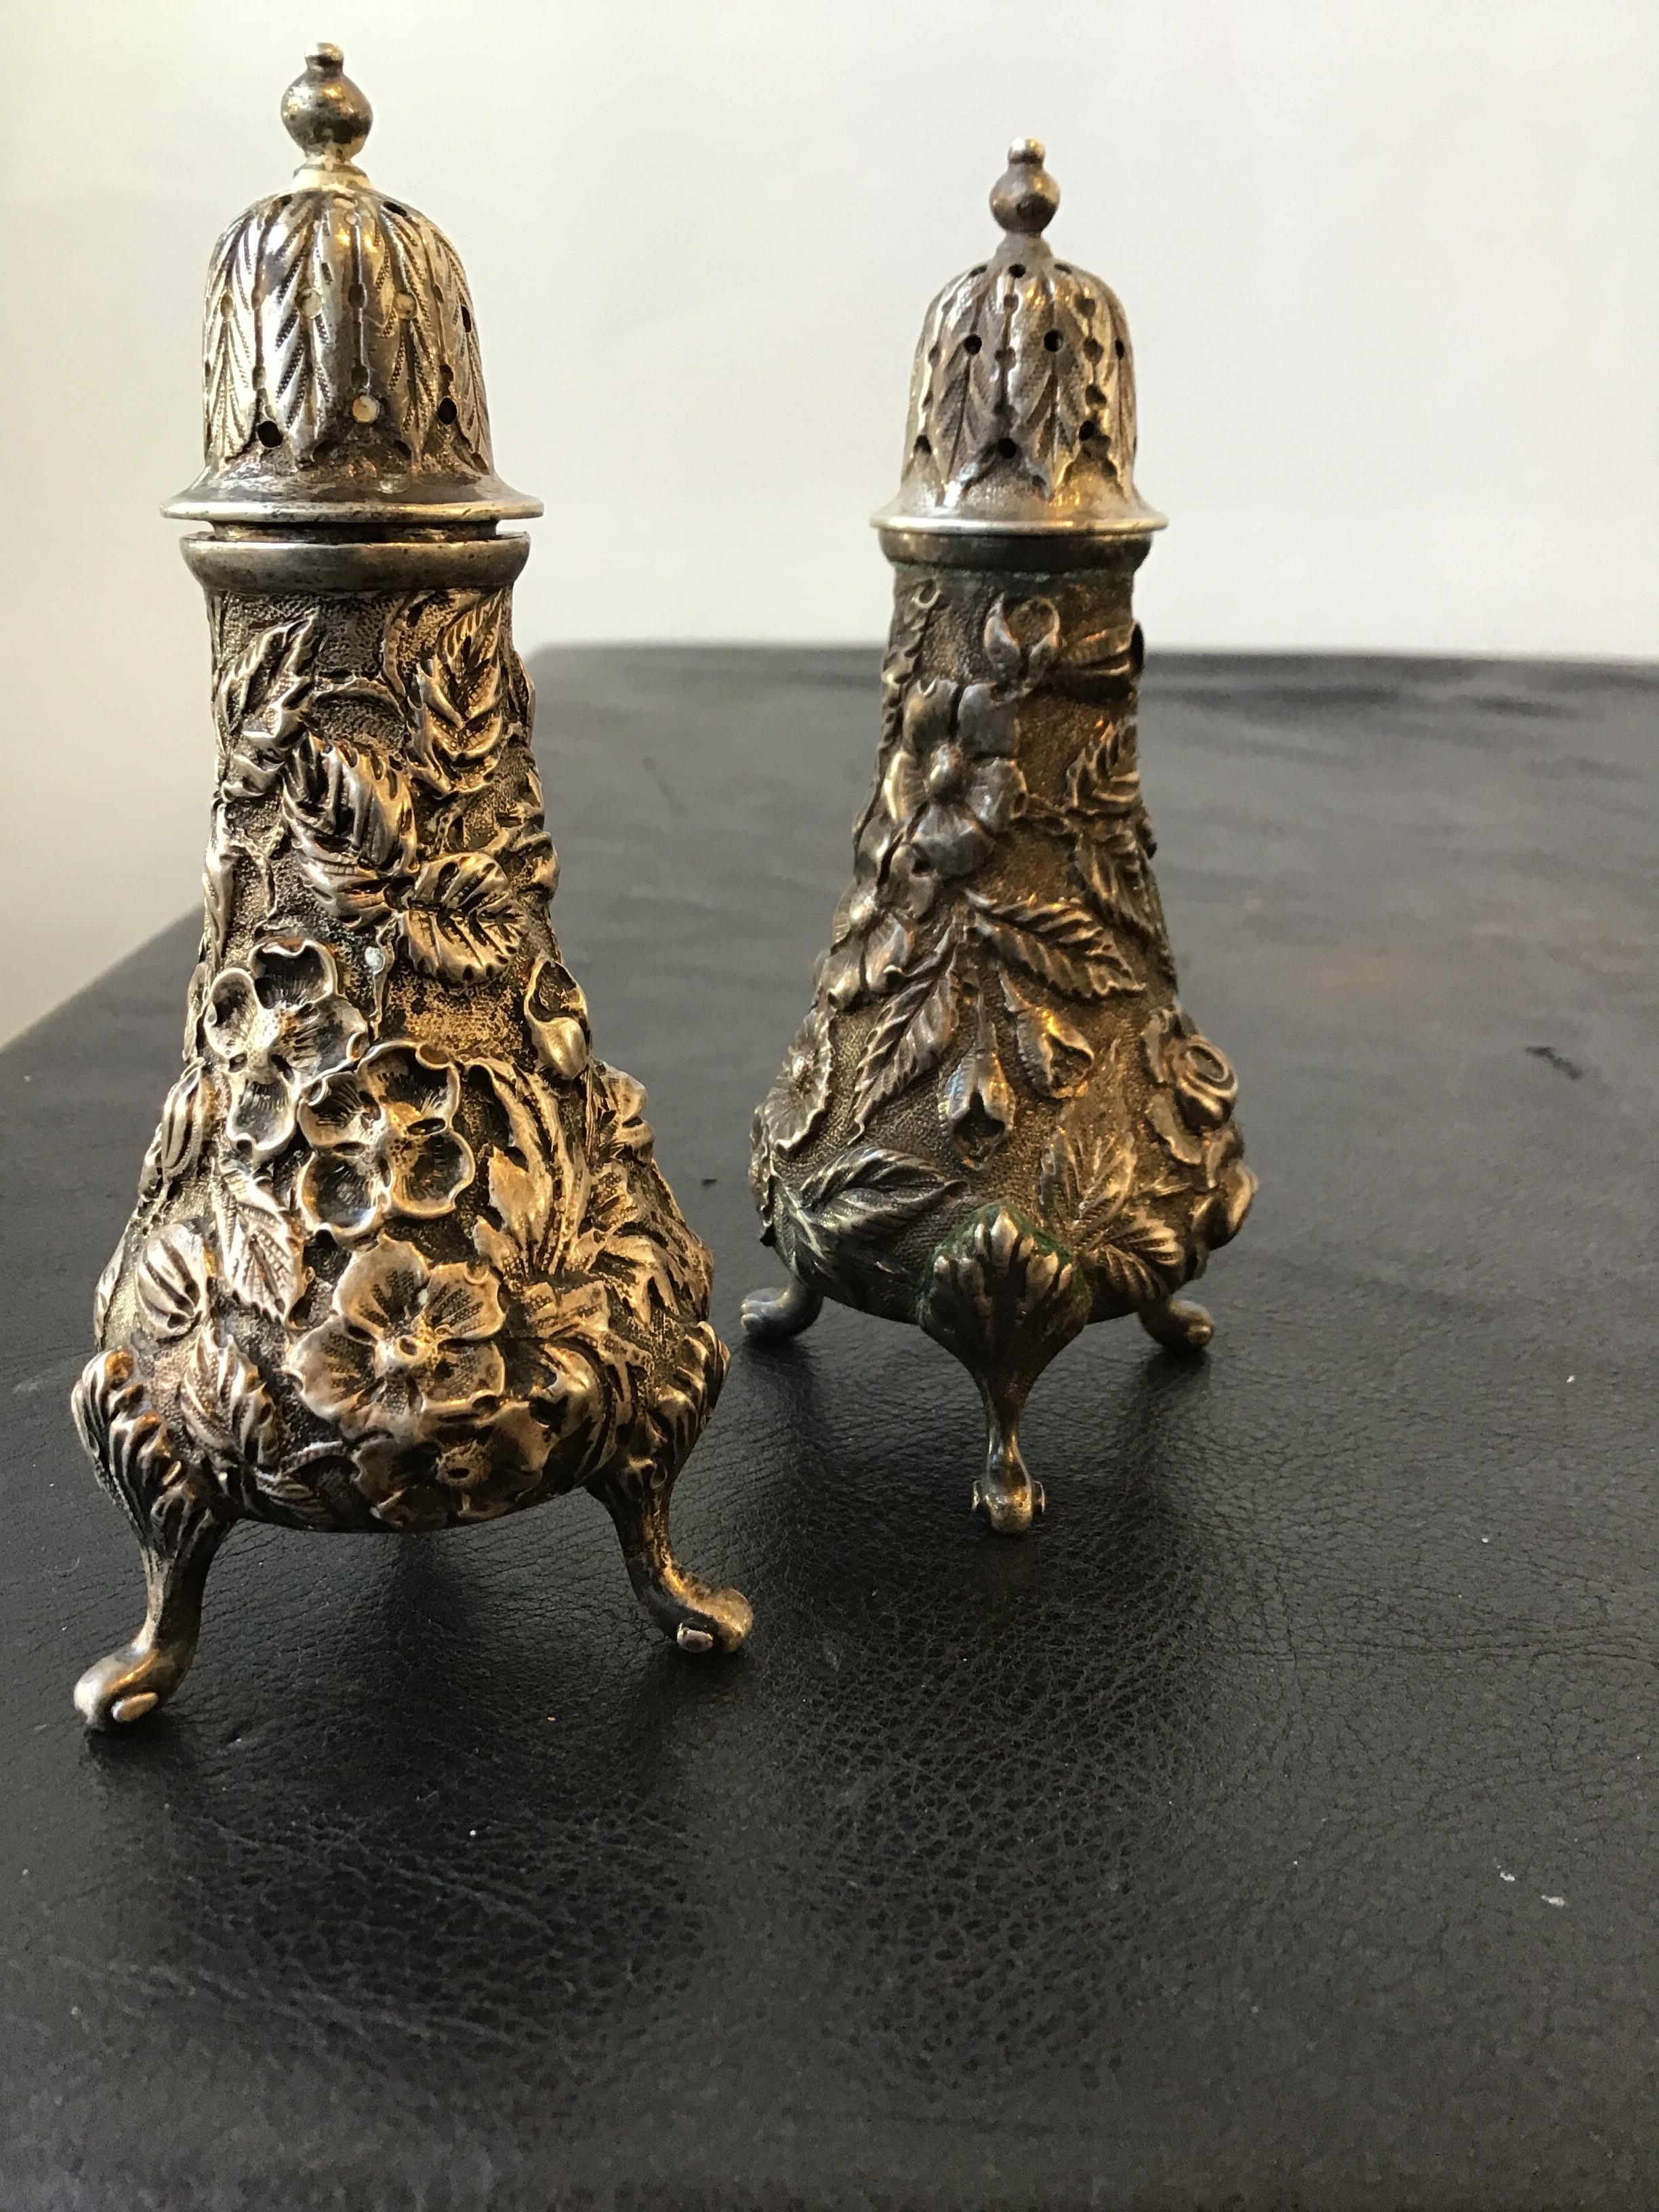 1920s Jacobi and Jenkins sterling repousse salt and pepper shakers. Weighs 4.8 ounces.